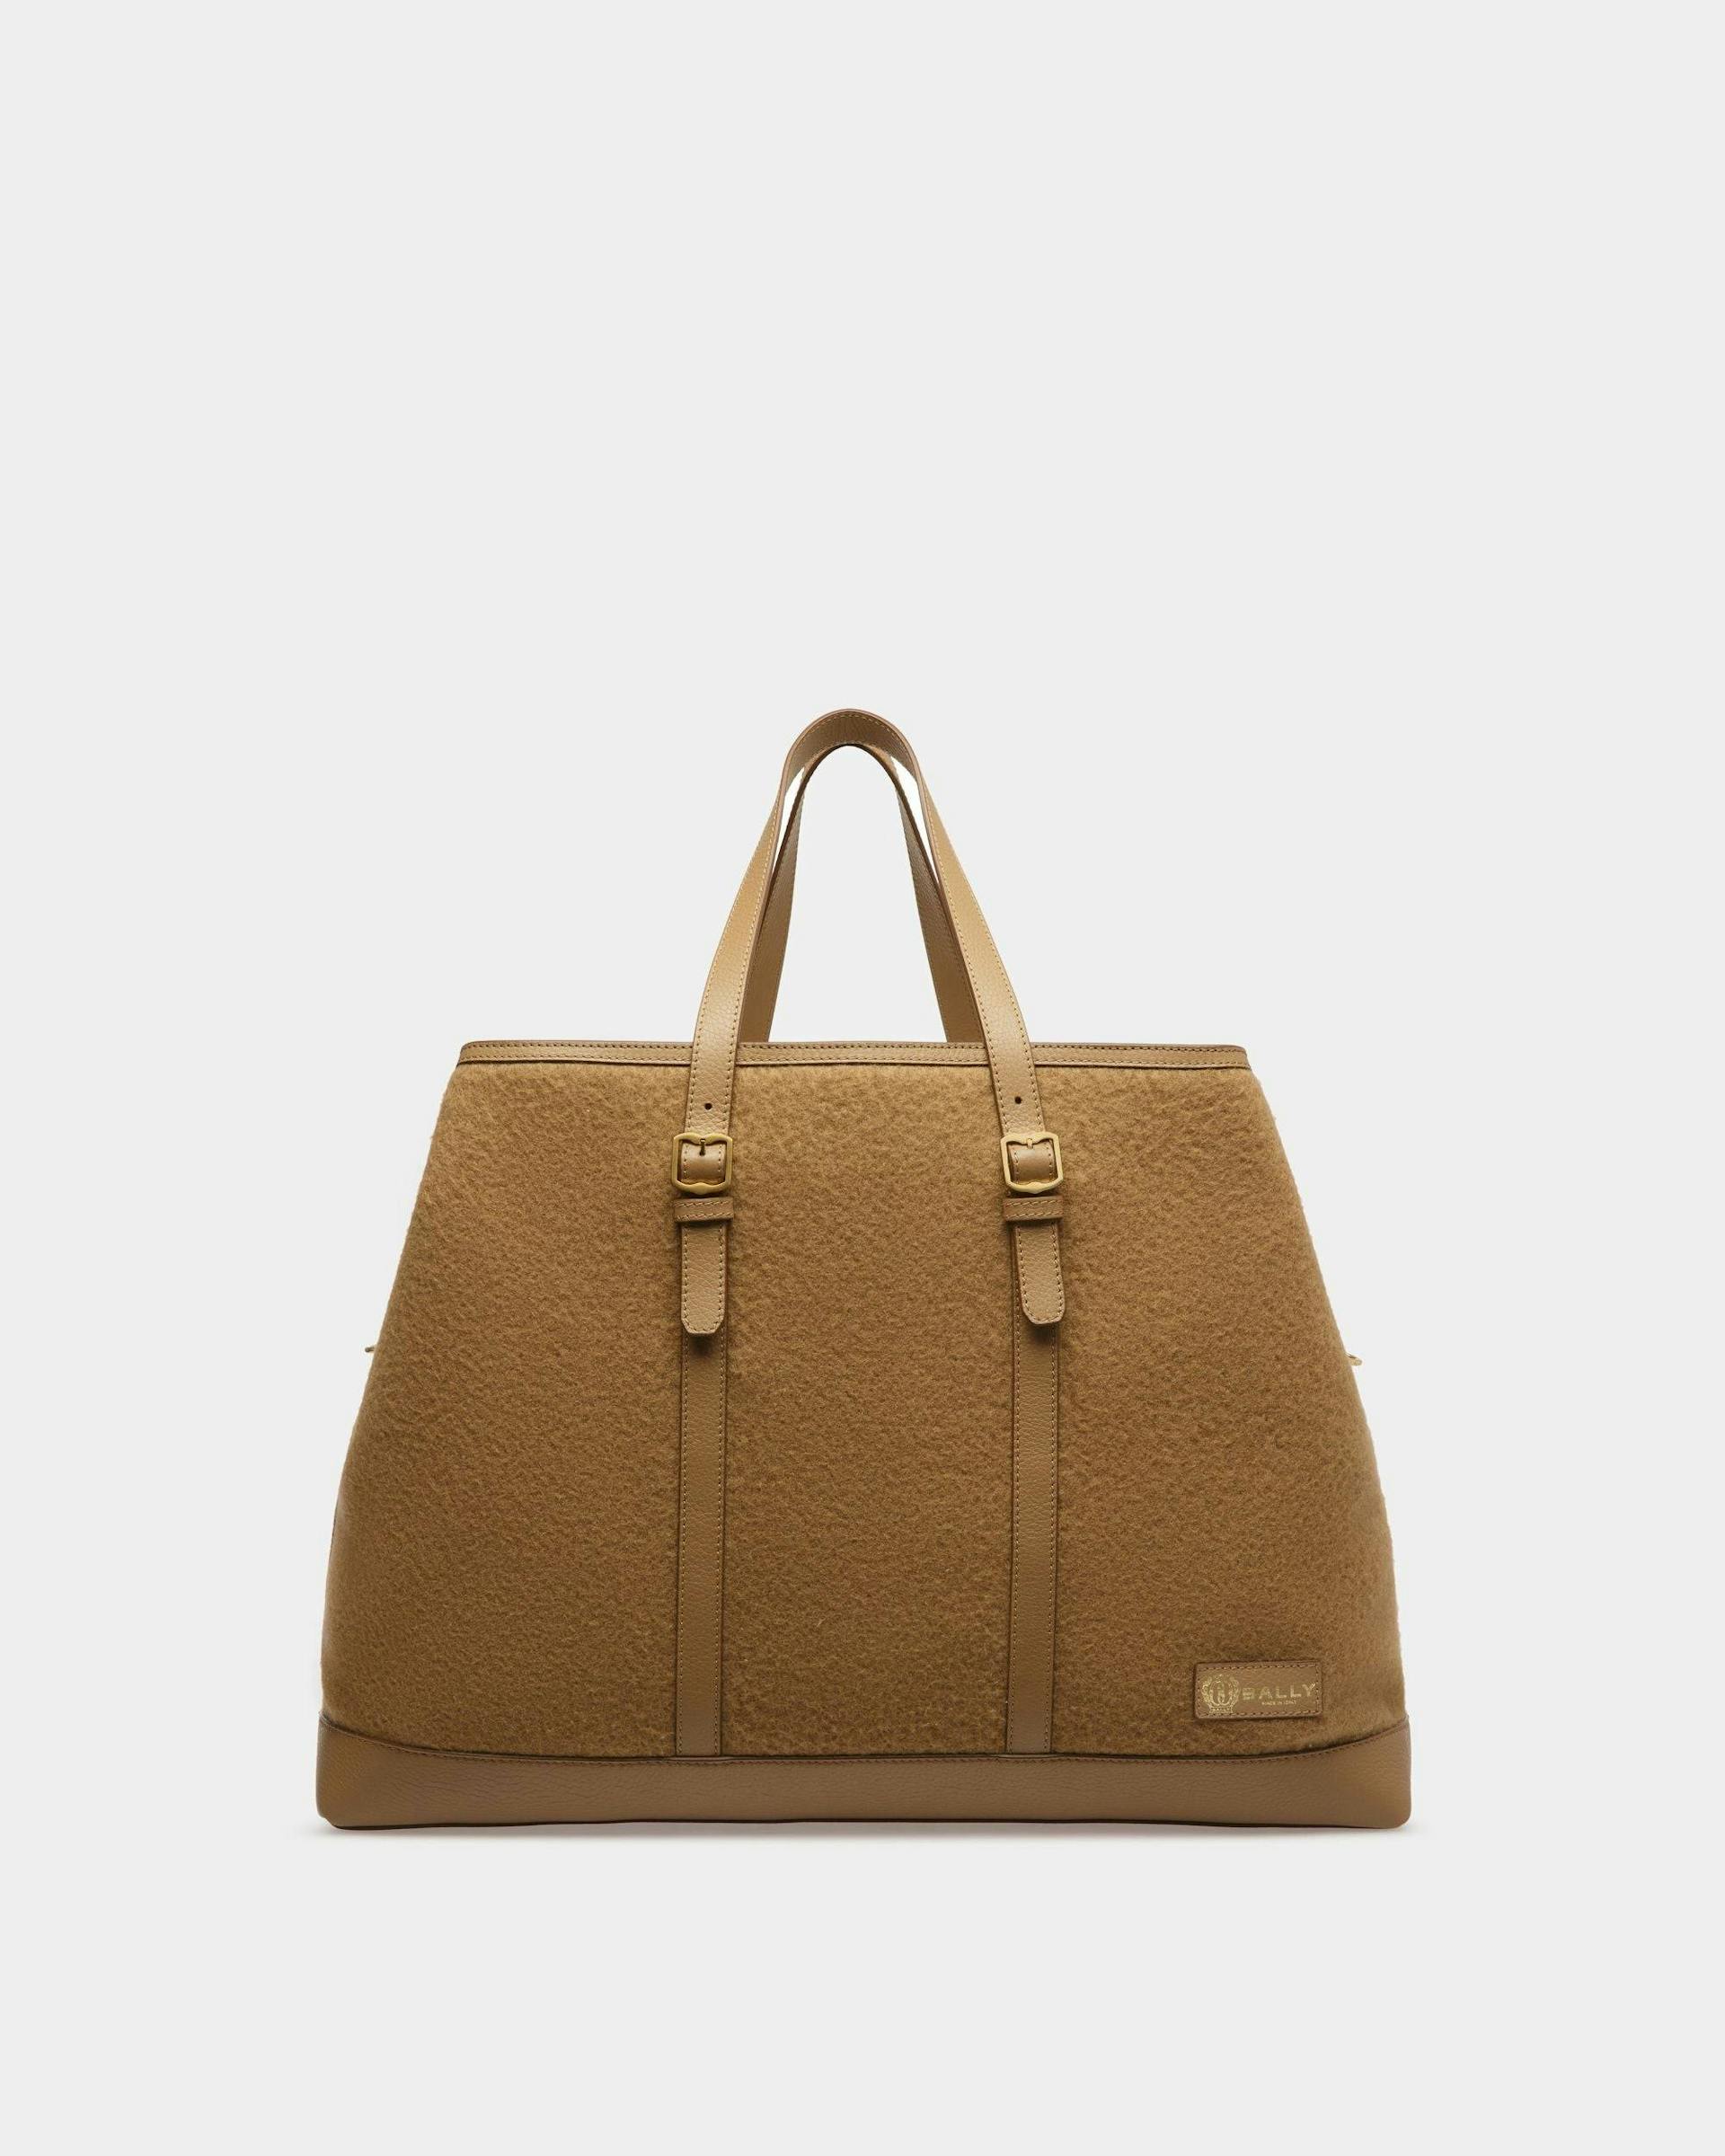 Gare Tote Bag In Camel Leather And Fabric - Men's - Bally - 01